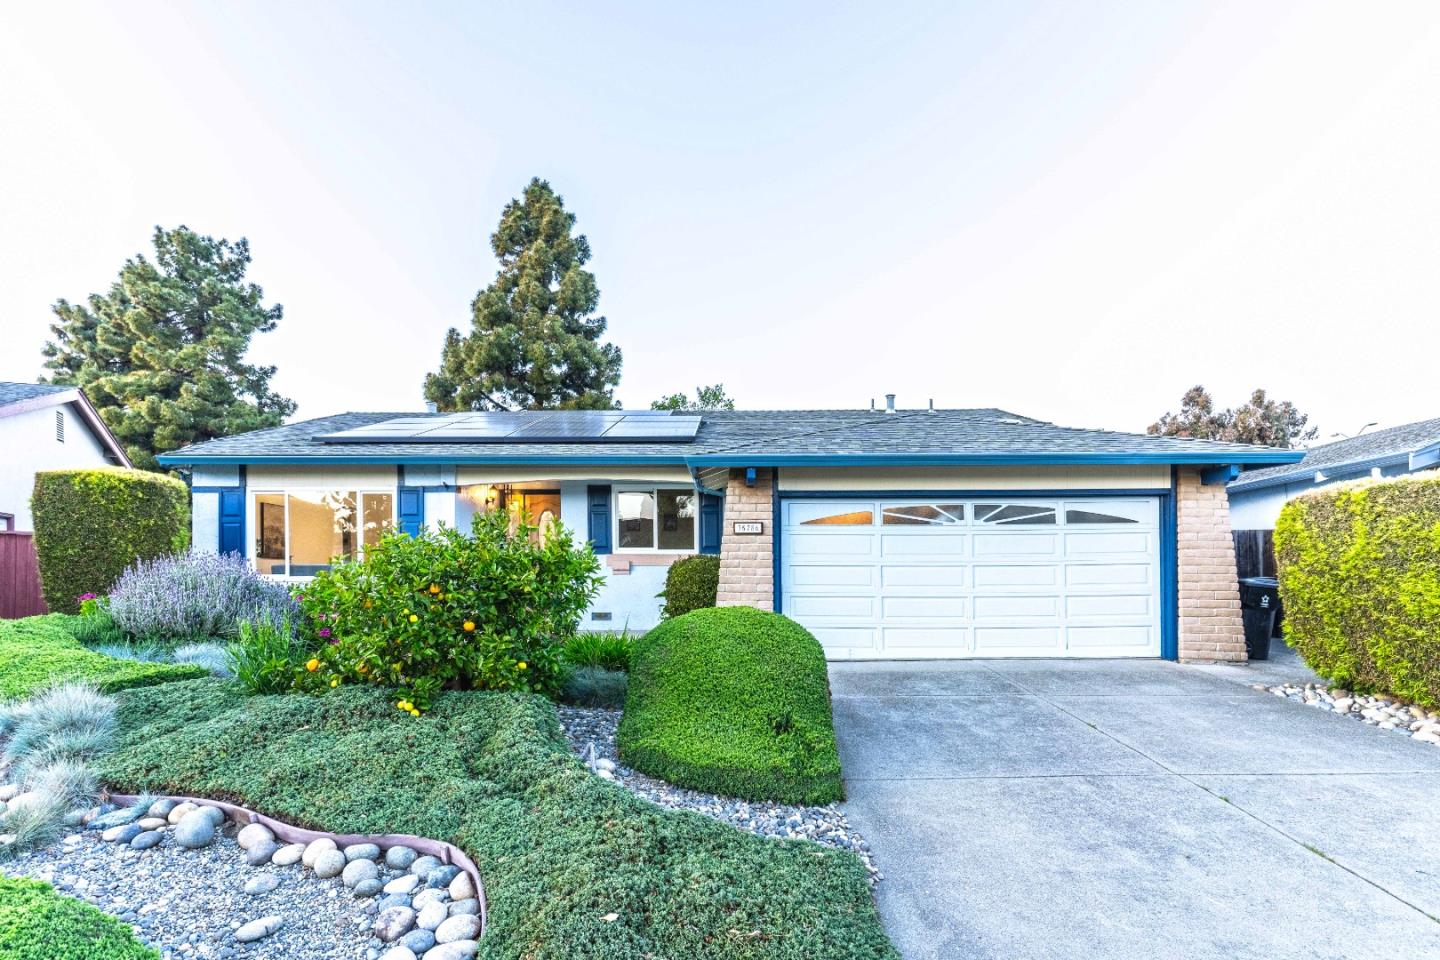 Photo of 35786 Augustine Ct in Fremont, CA